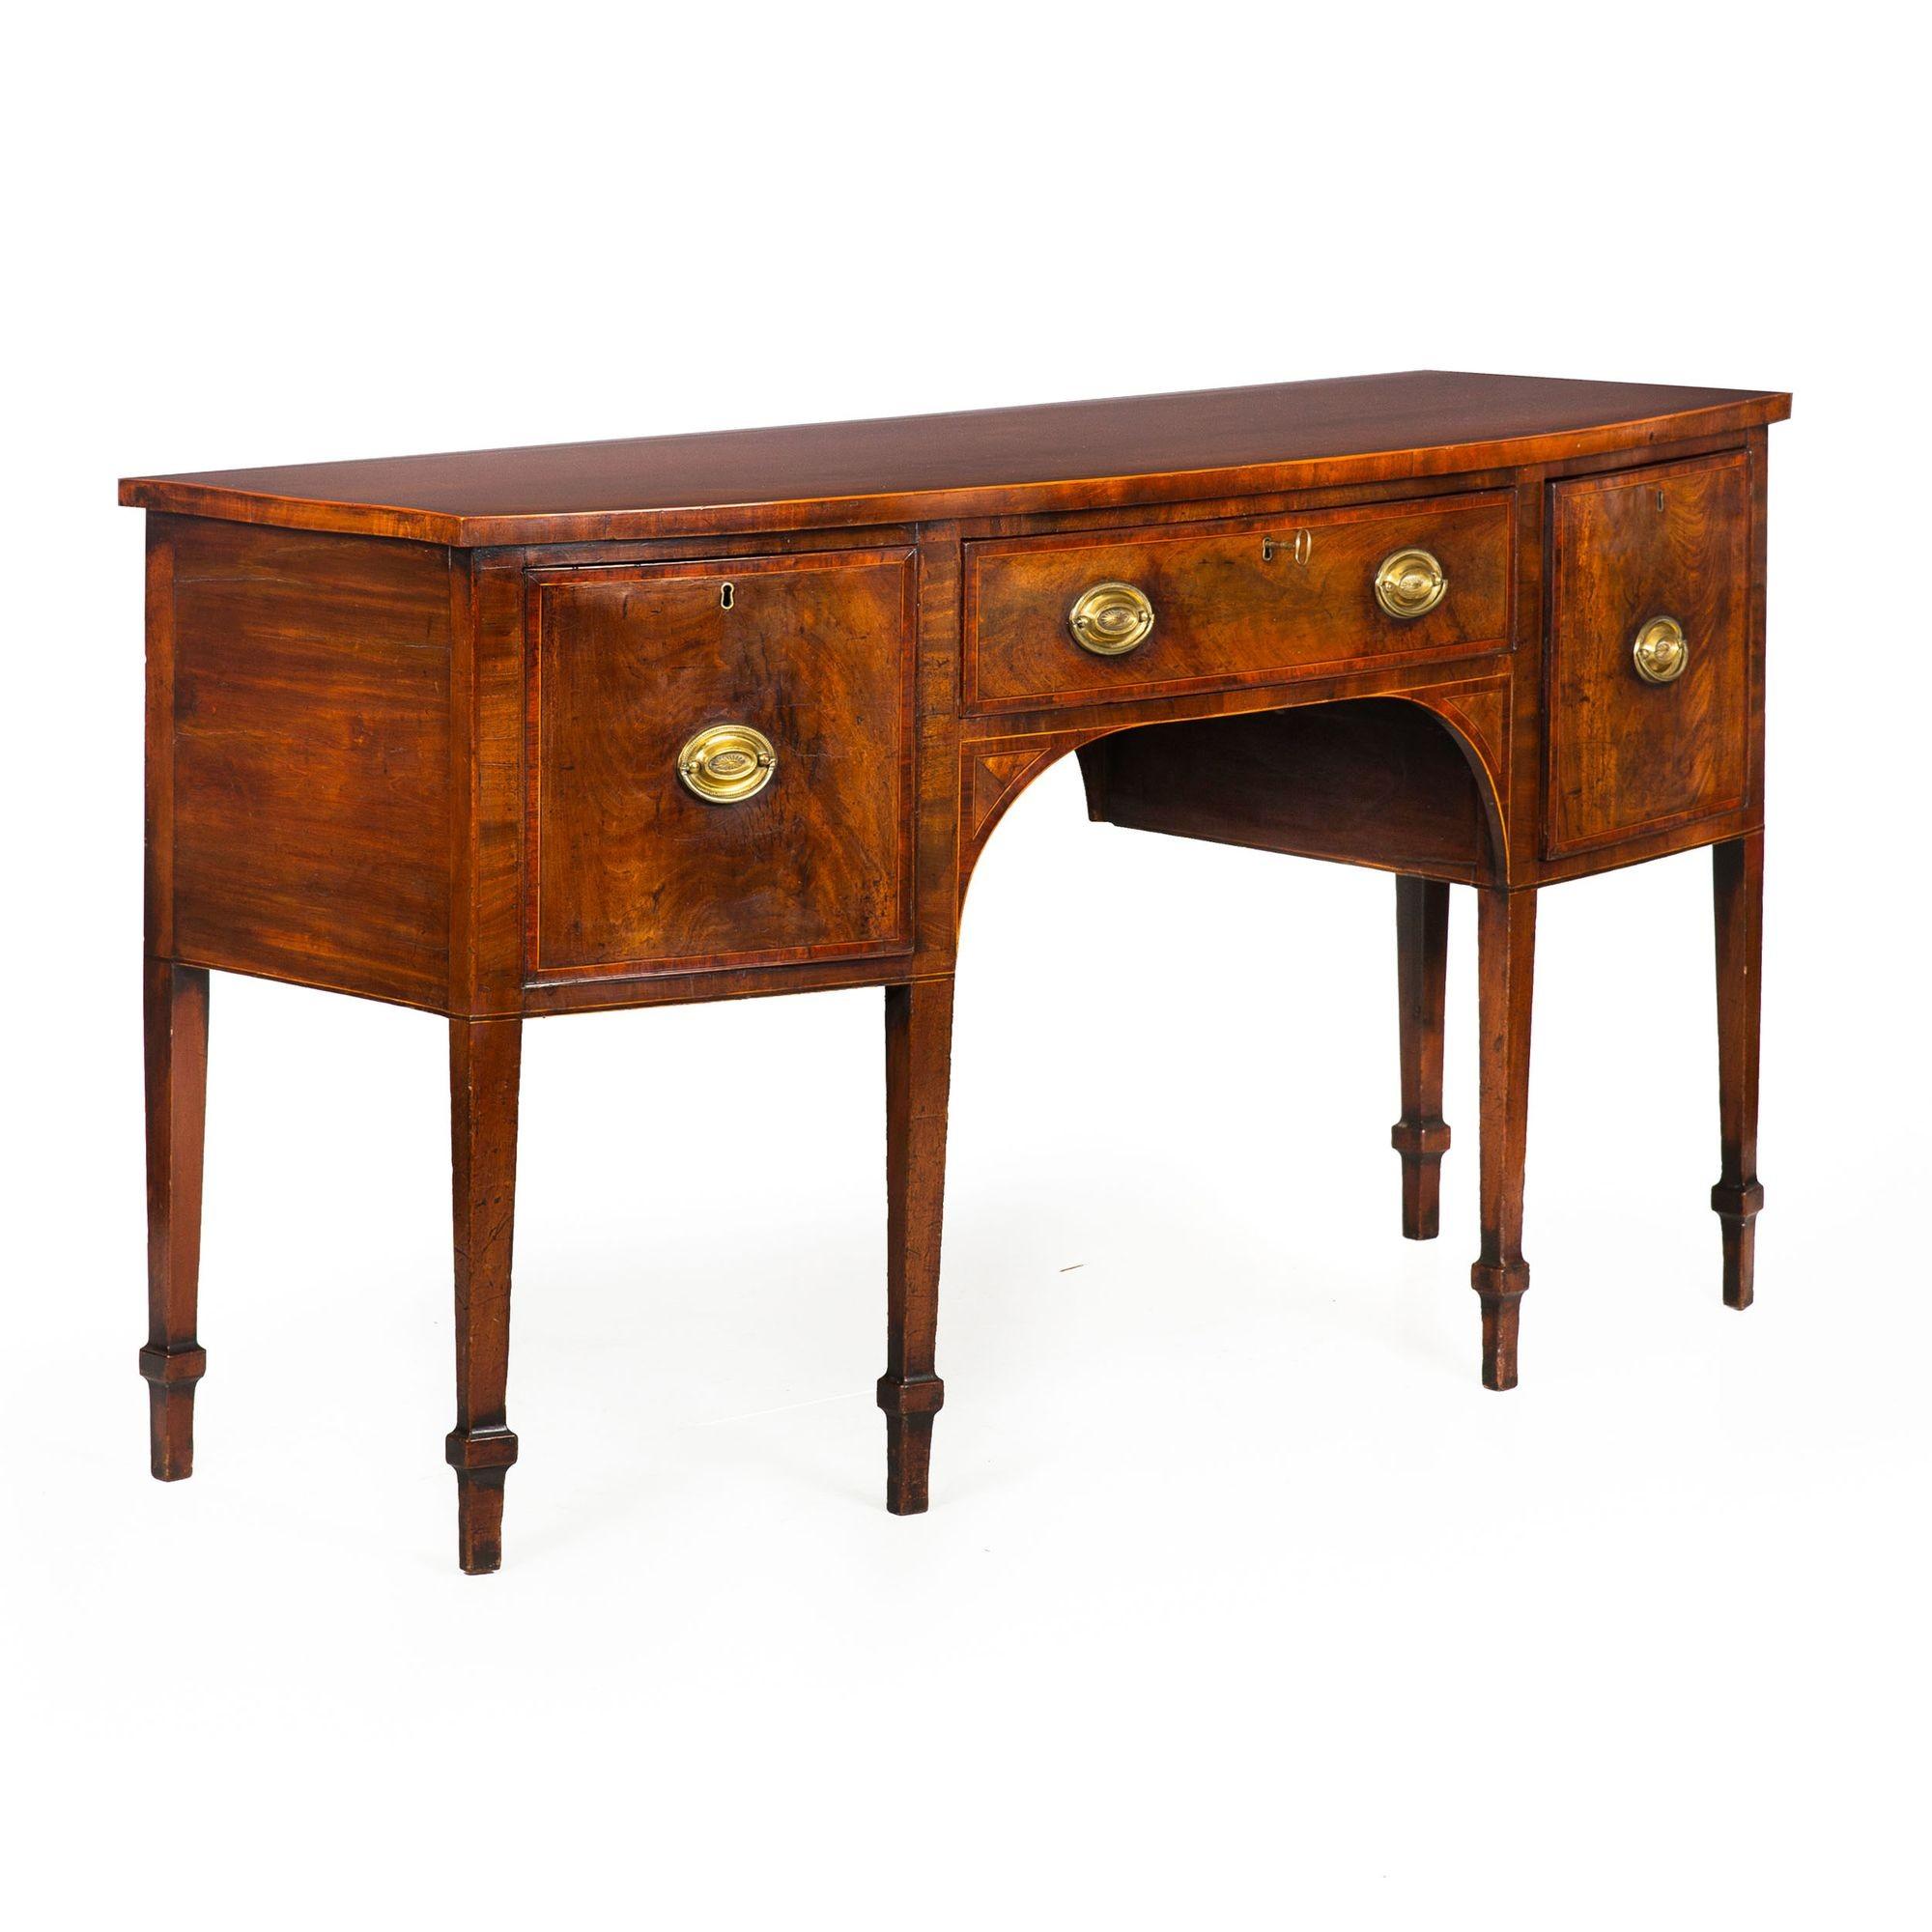 GEORGE III INLAID MAHOGANY SIDEBOARD OF GOOD DIMENSIONS
England, circa 1780
Item # 311IXP30A
An incredibly beautiful George III period sideboard circa 1780, it is particularly nice for the restrained size of the case, which measures only 59 1/2